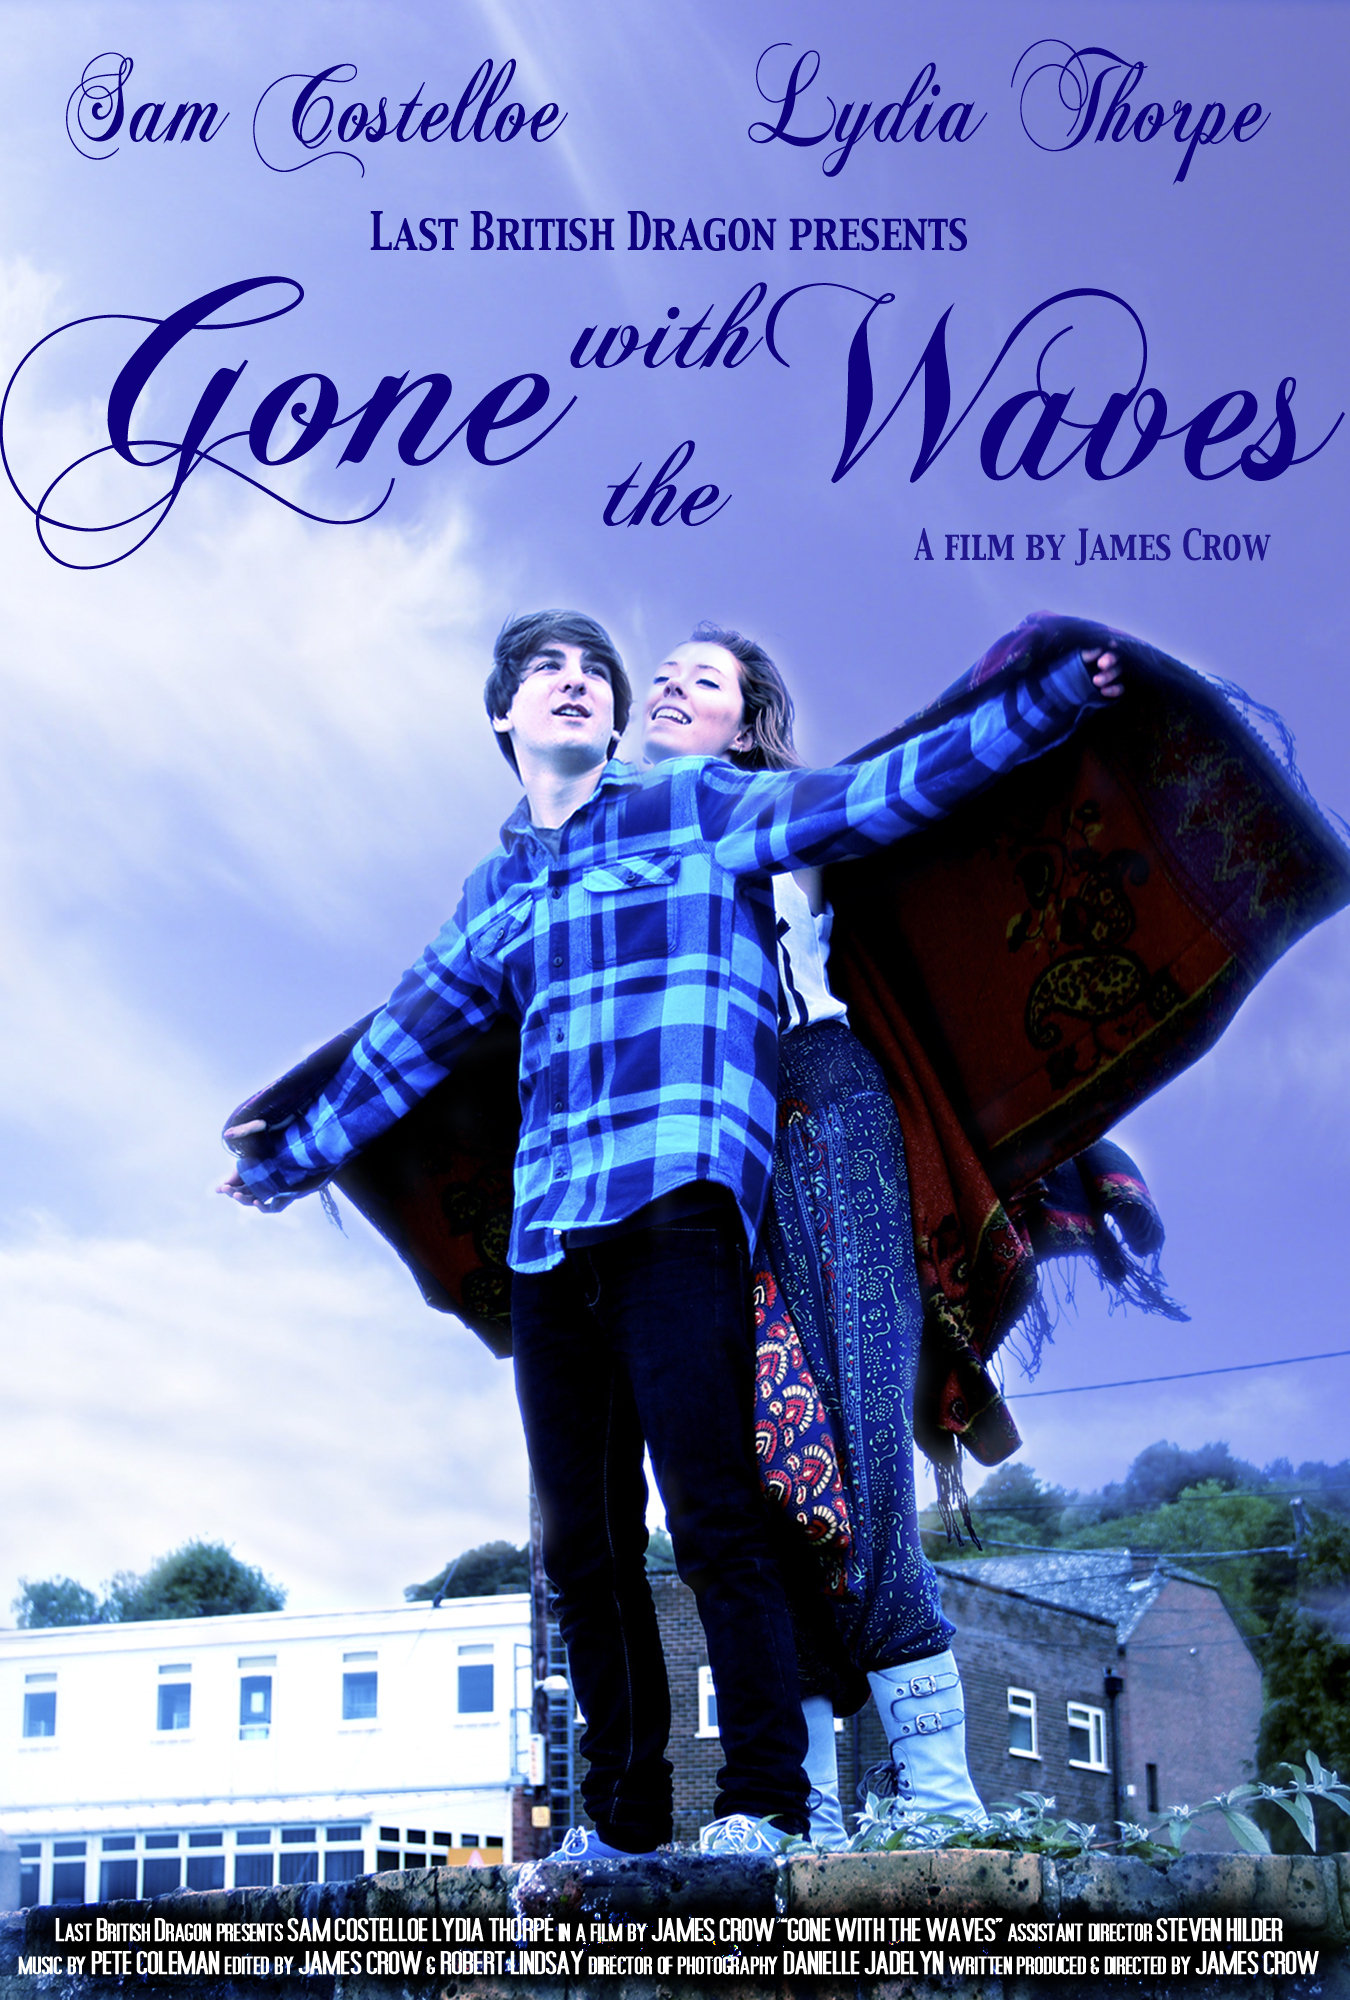 Poster for comedy Gone with the Waves. Starring Sam Costelloe and Lydia Thorpe